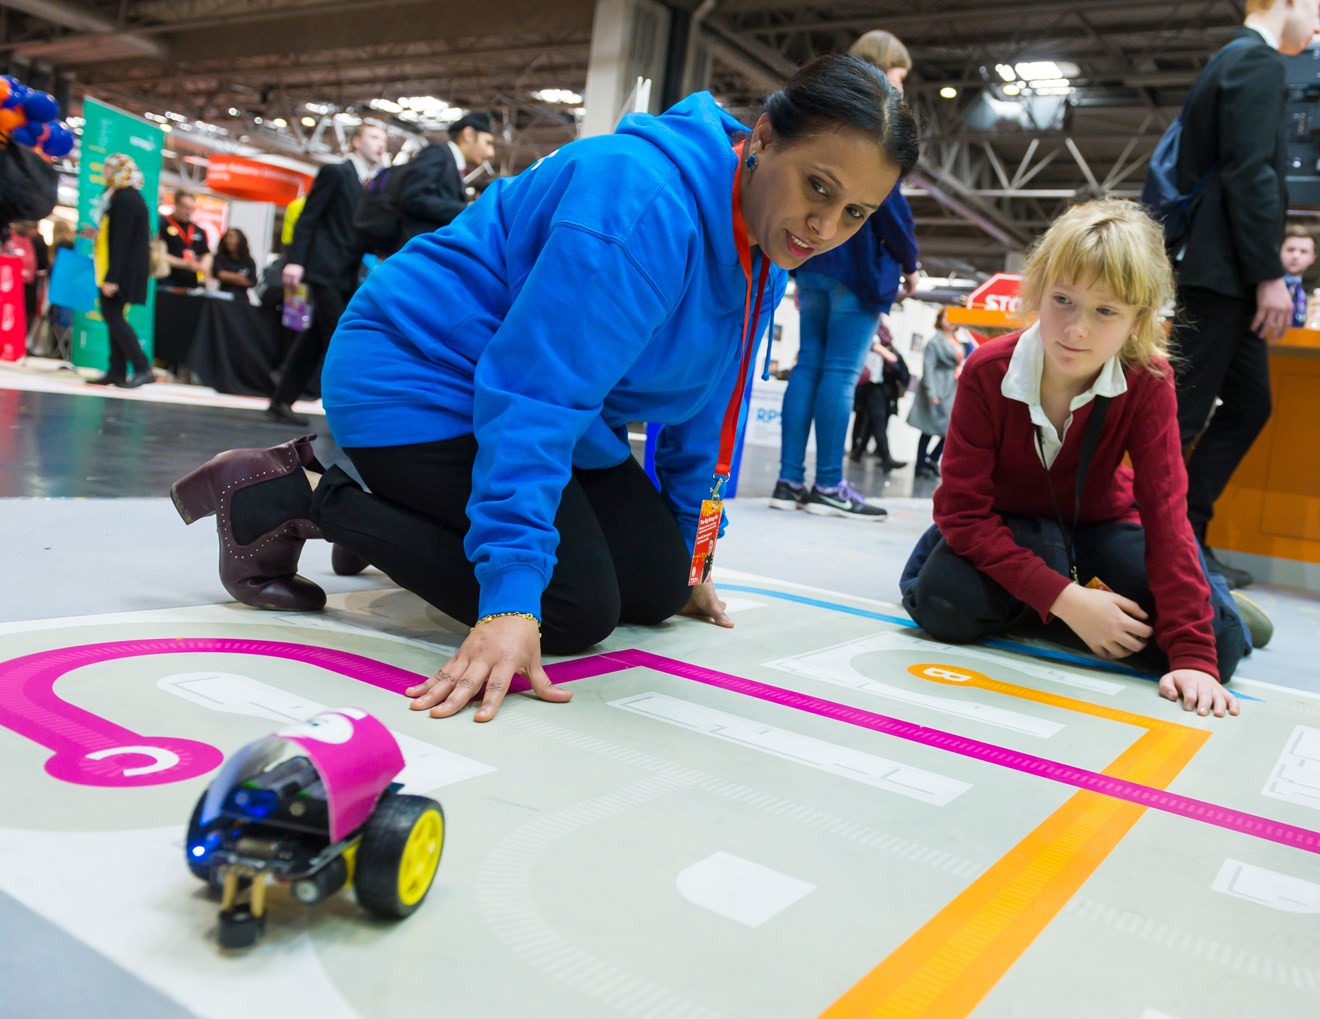 Siemens to spark interest in engineering this bank holiday: STEM image